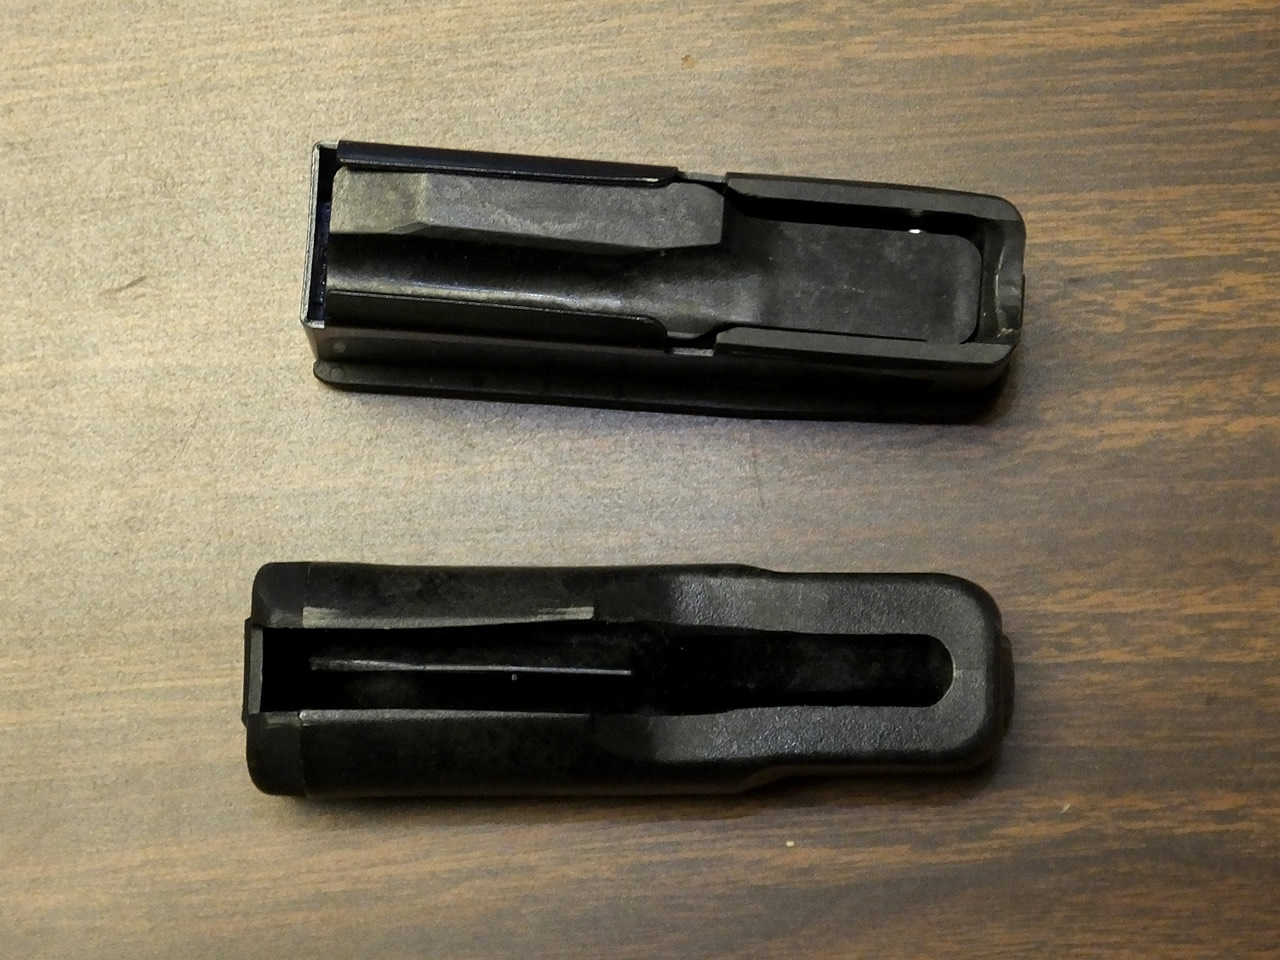 AB3 and X-Bolt Magazines